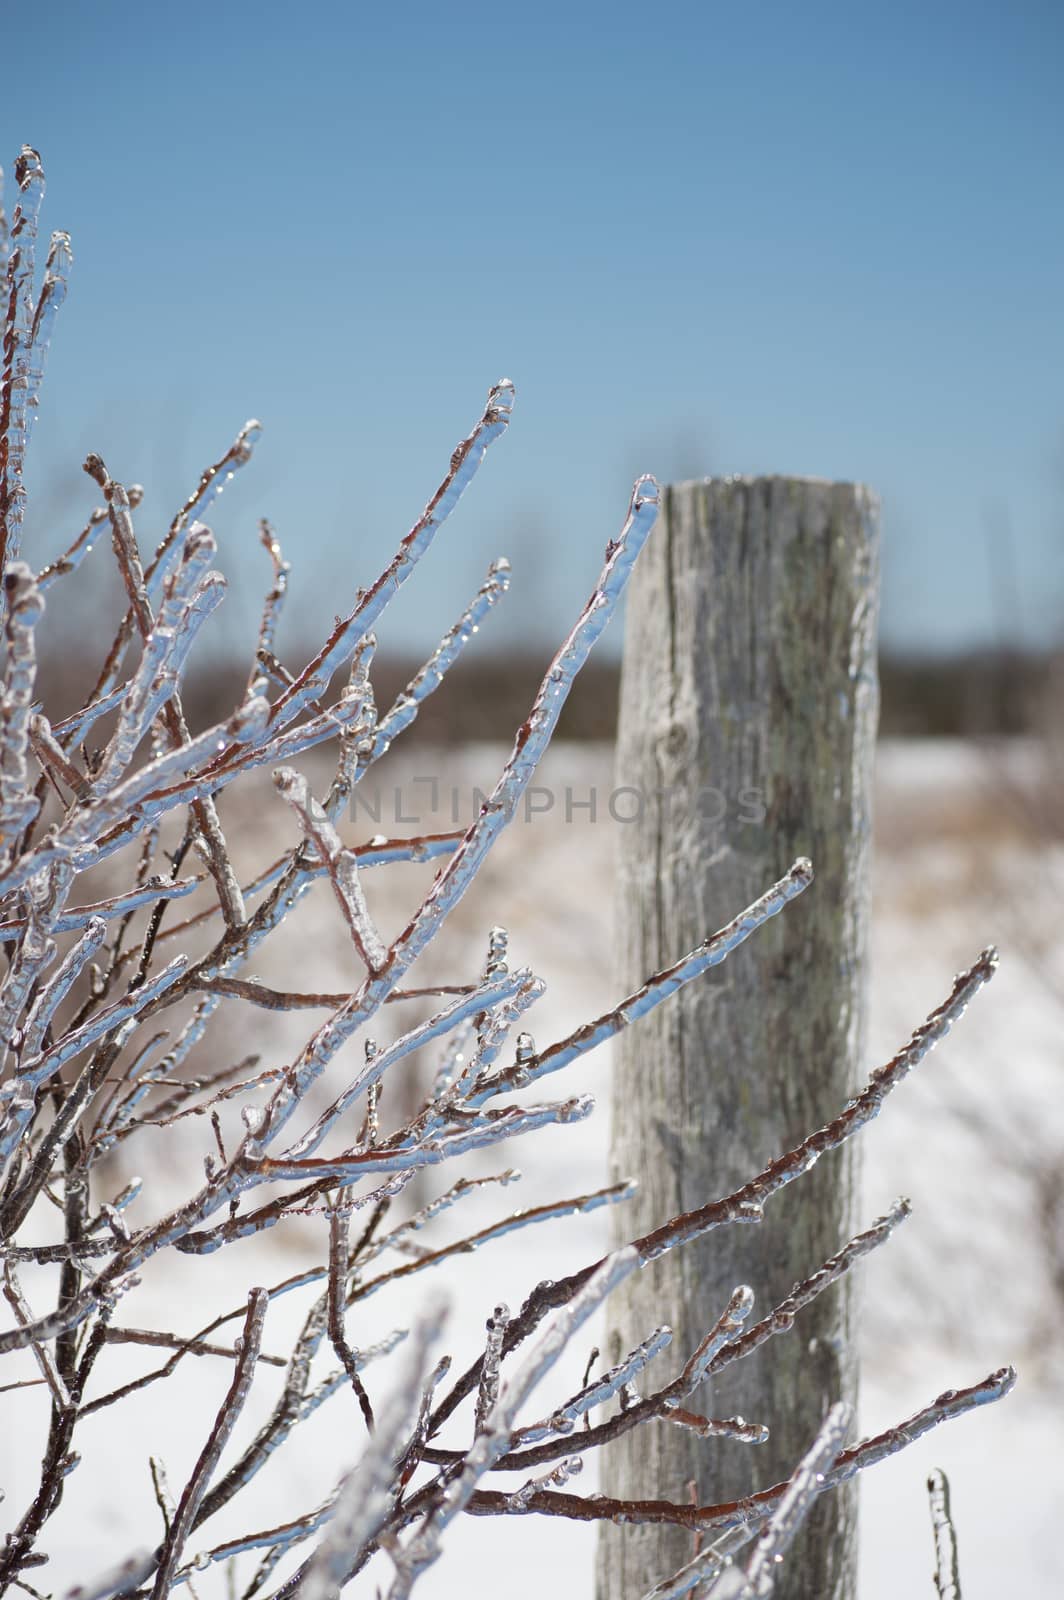 A bright brillinat closeup of ice encrusted twigs and an old cedar fencepost